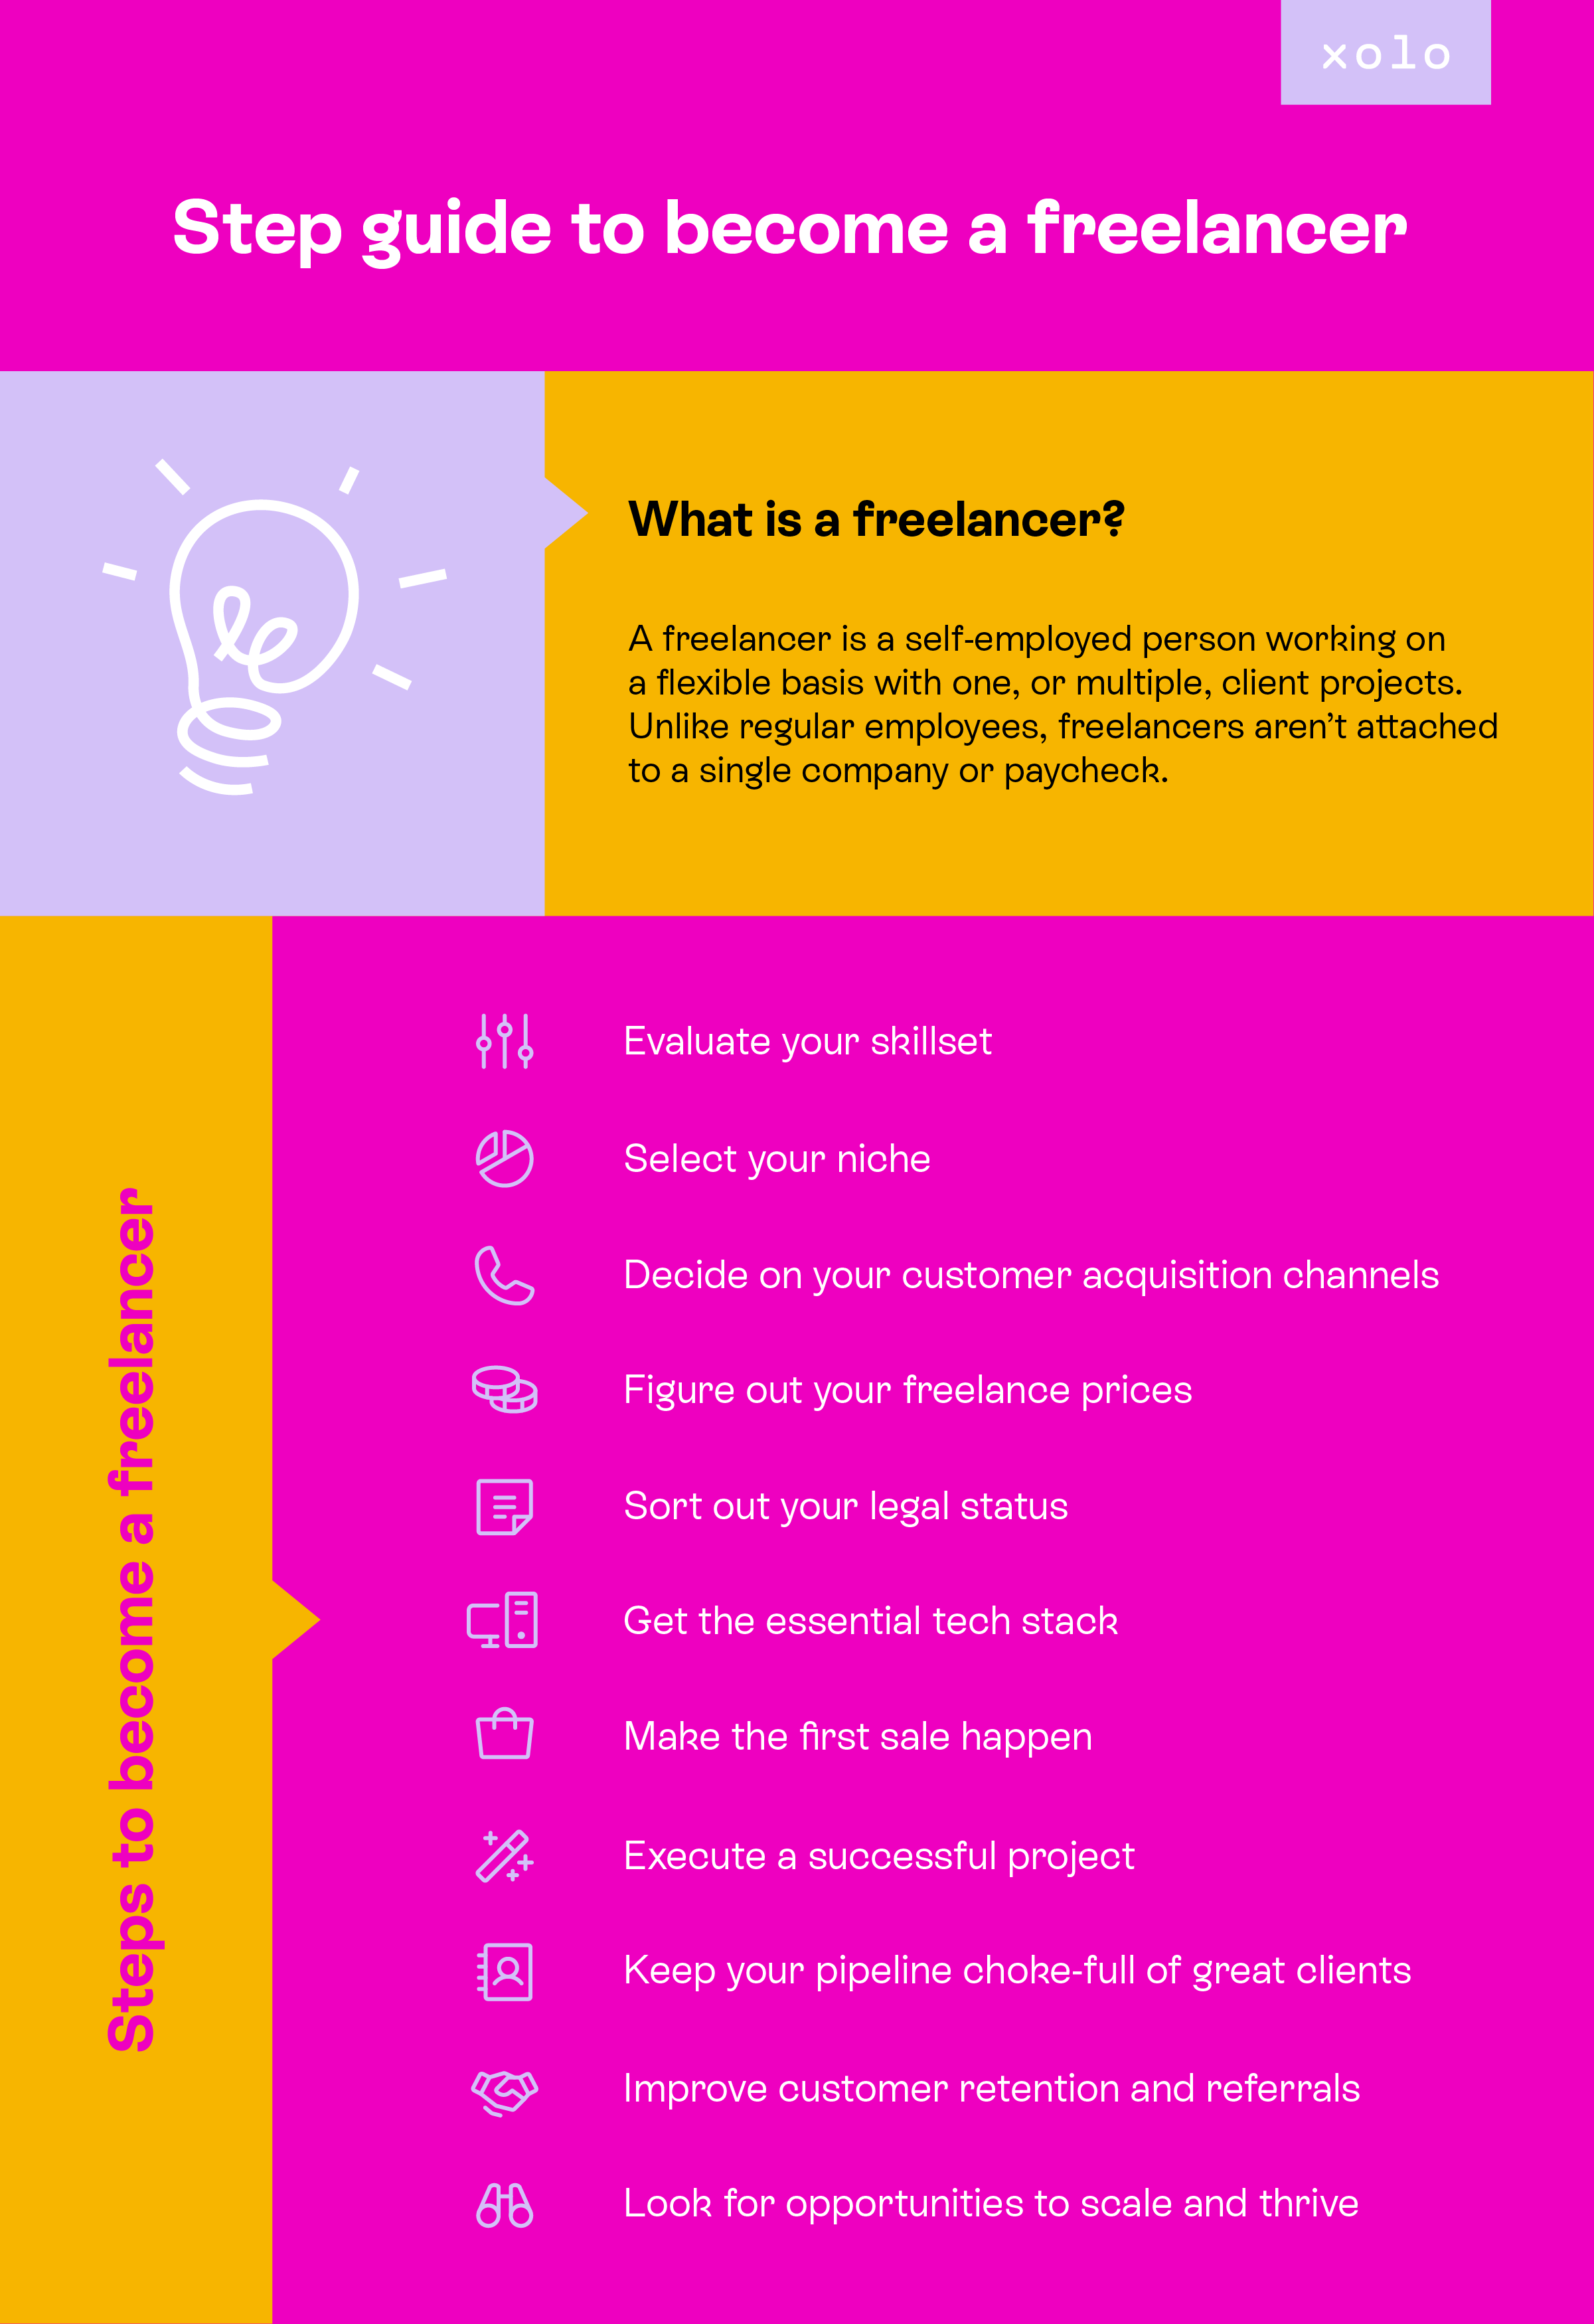 Step-by-step guide to become a freelancer